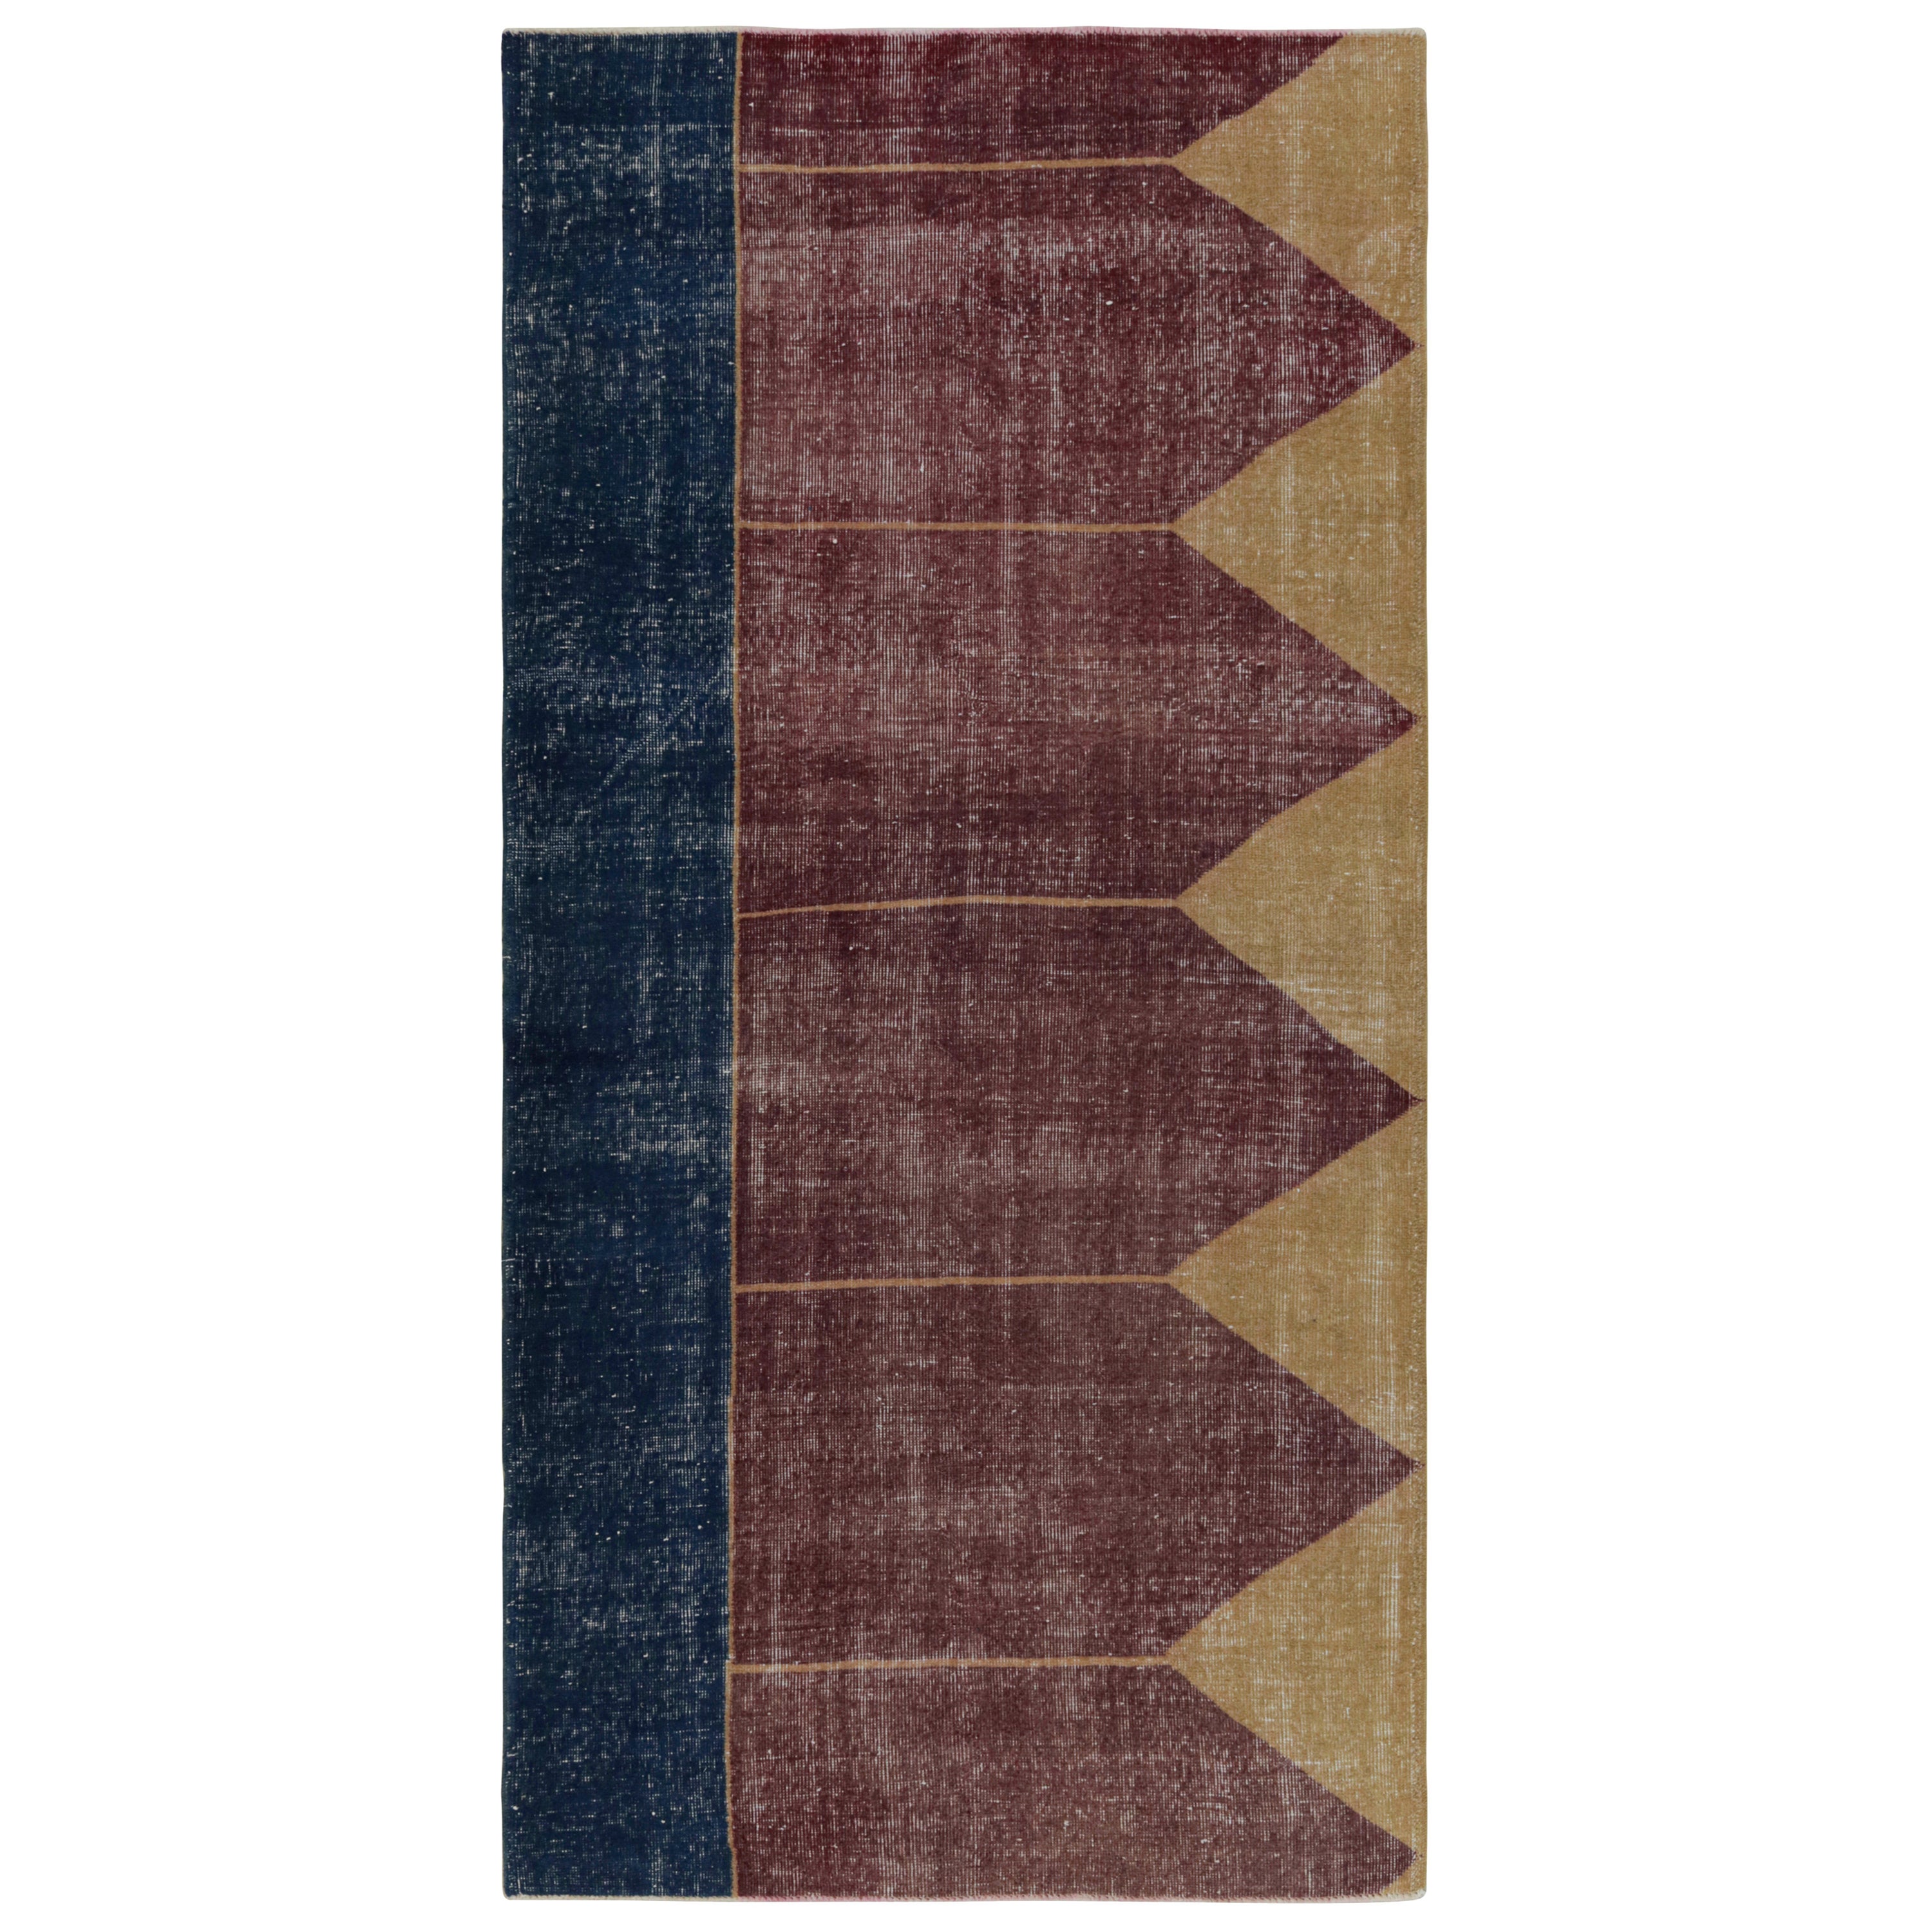 Vintage Turkish Rug in Brown, with Geometric Patterns, from Rug & Kilim For Sale